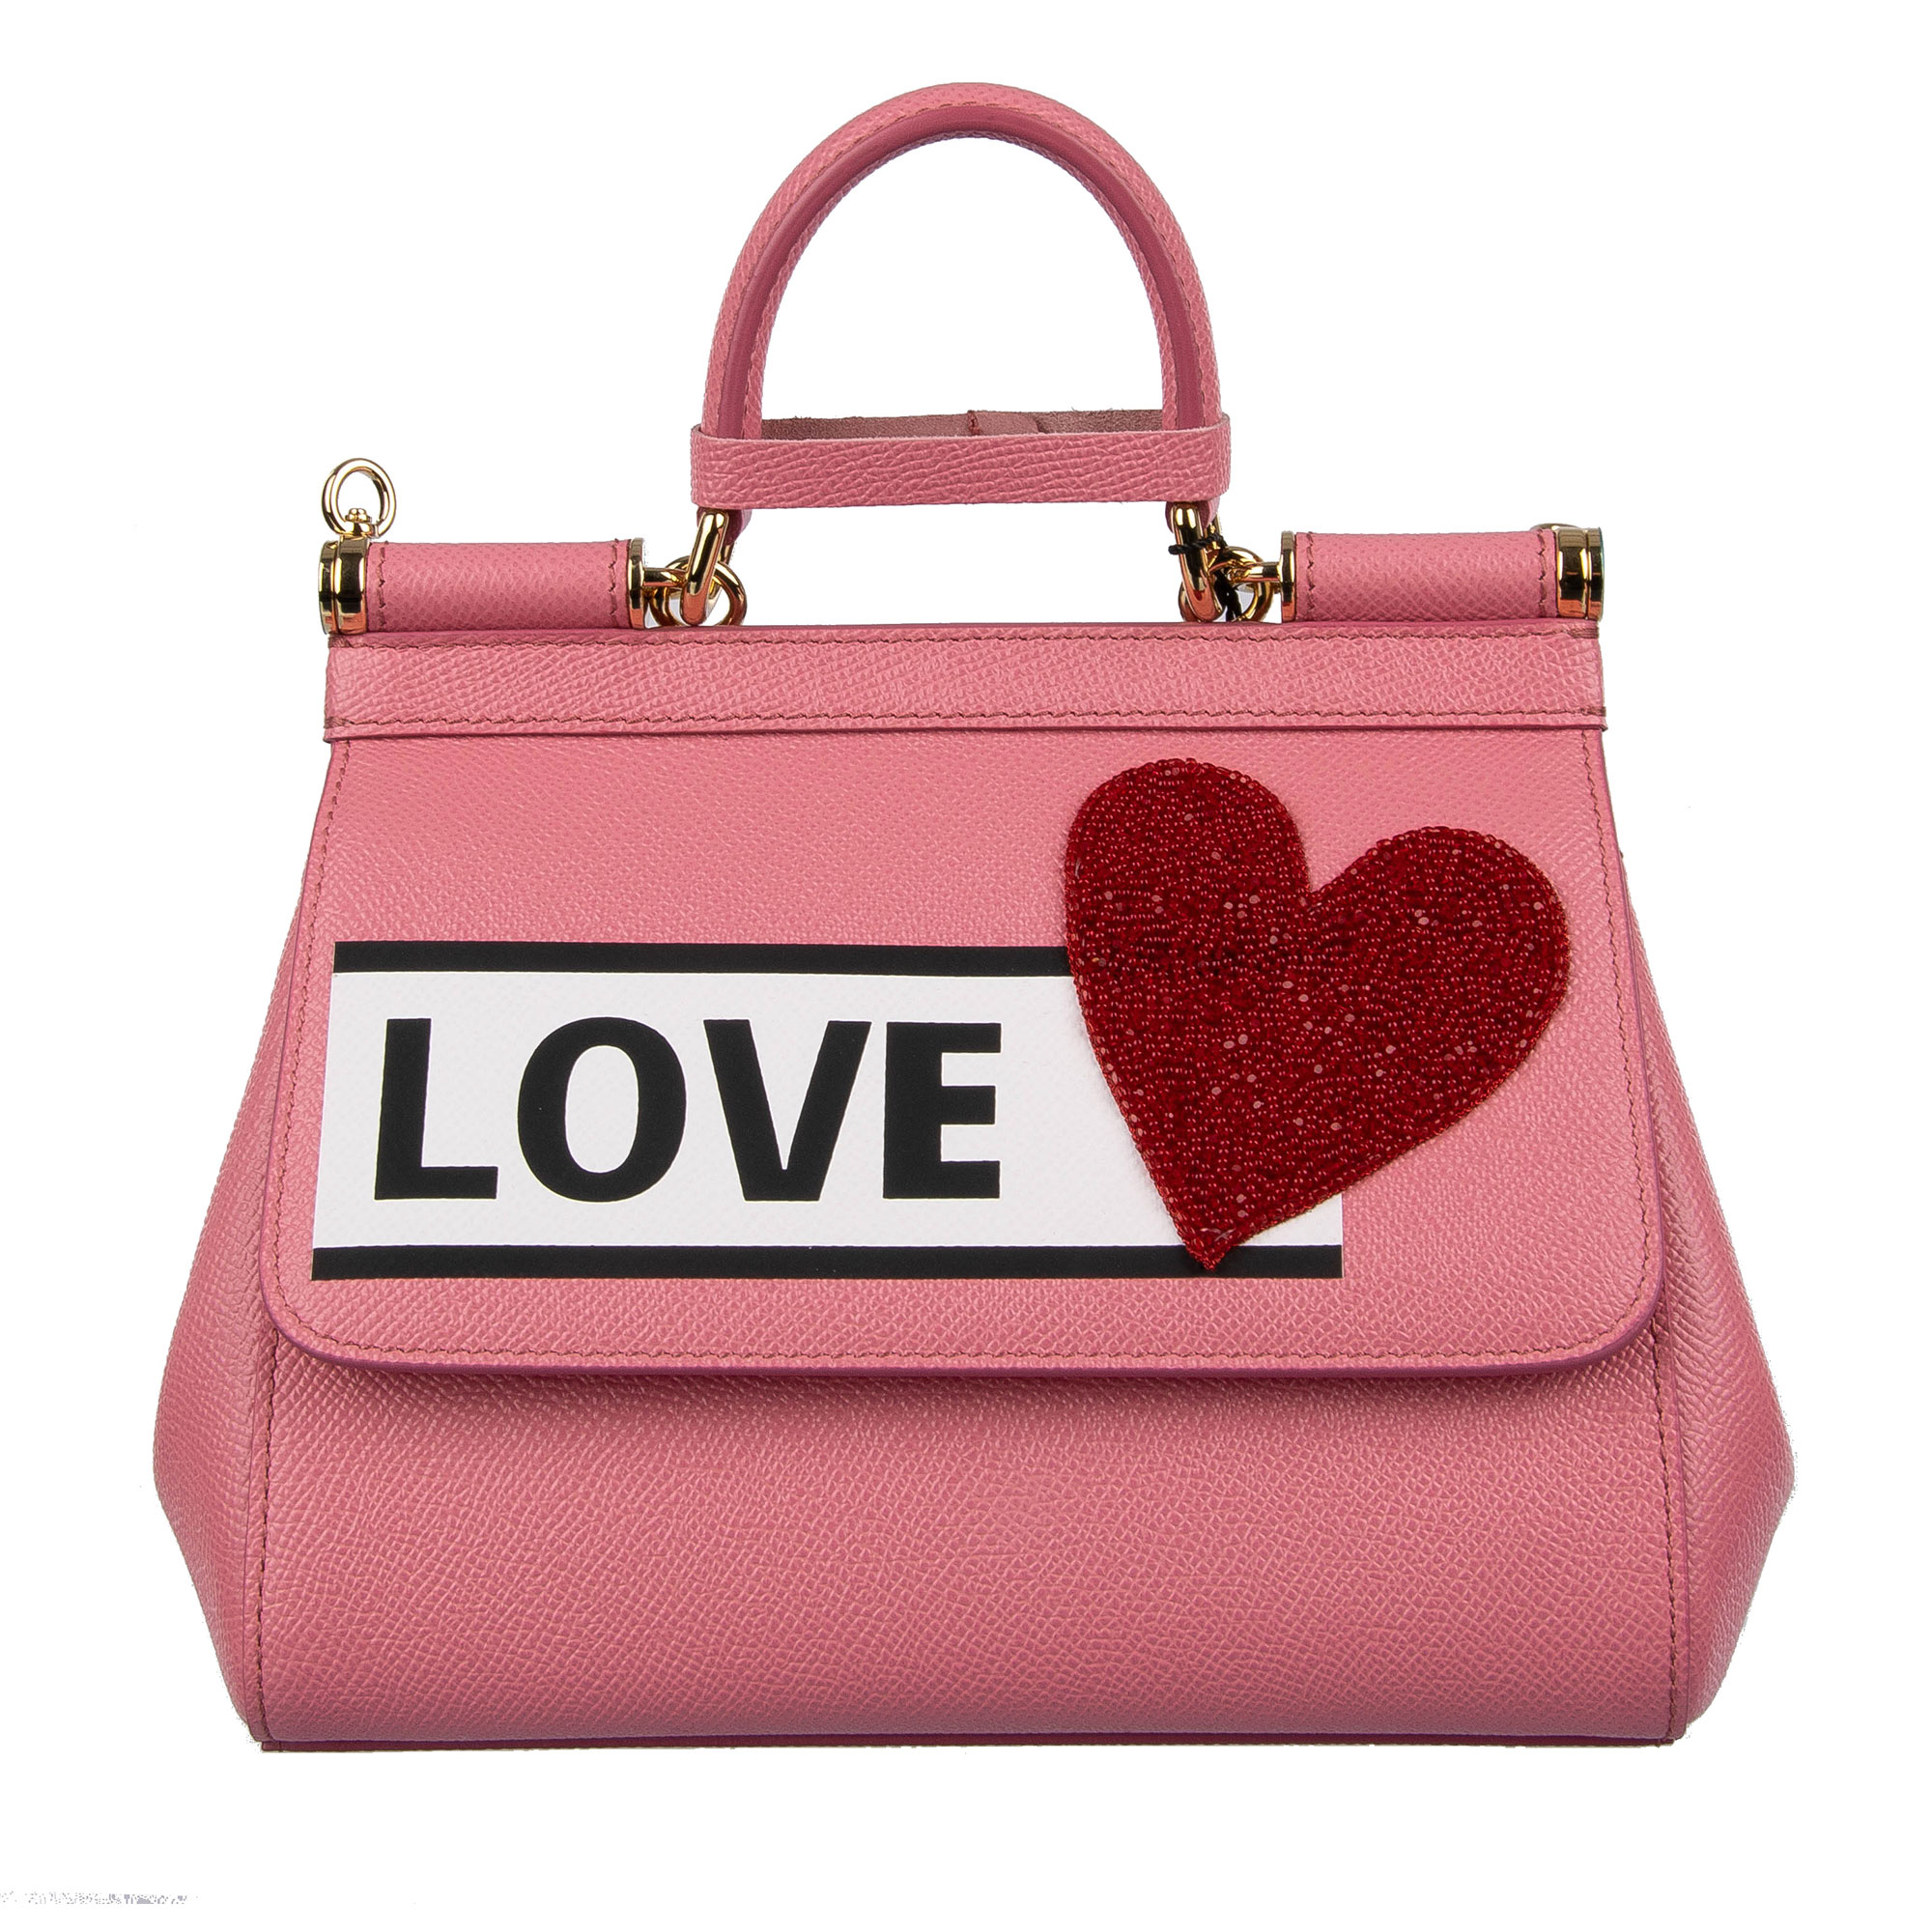 Dolce & Gabbana Small Sicily Bag in Dauphine Leather OS Pink Leather